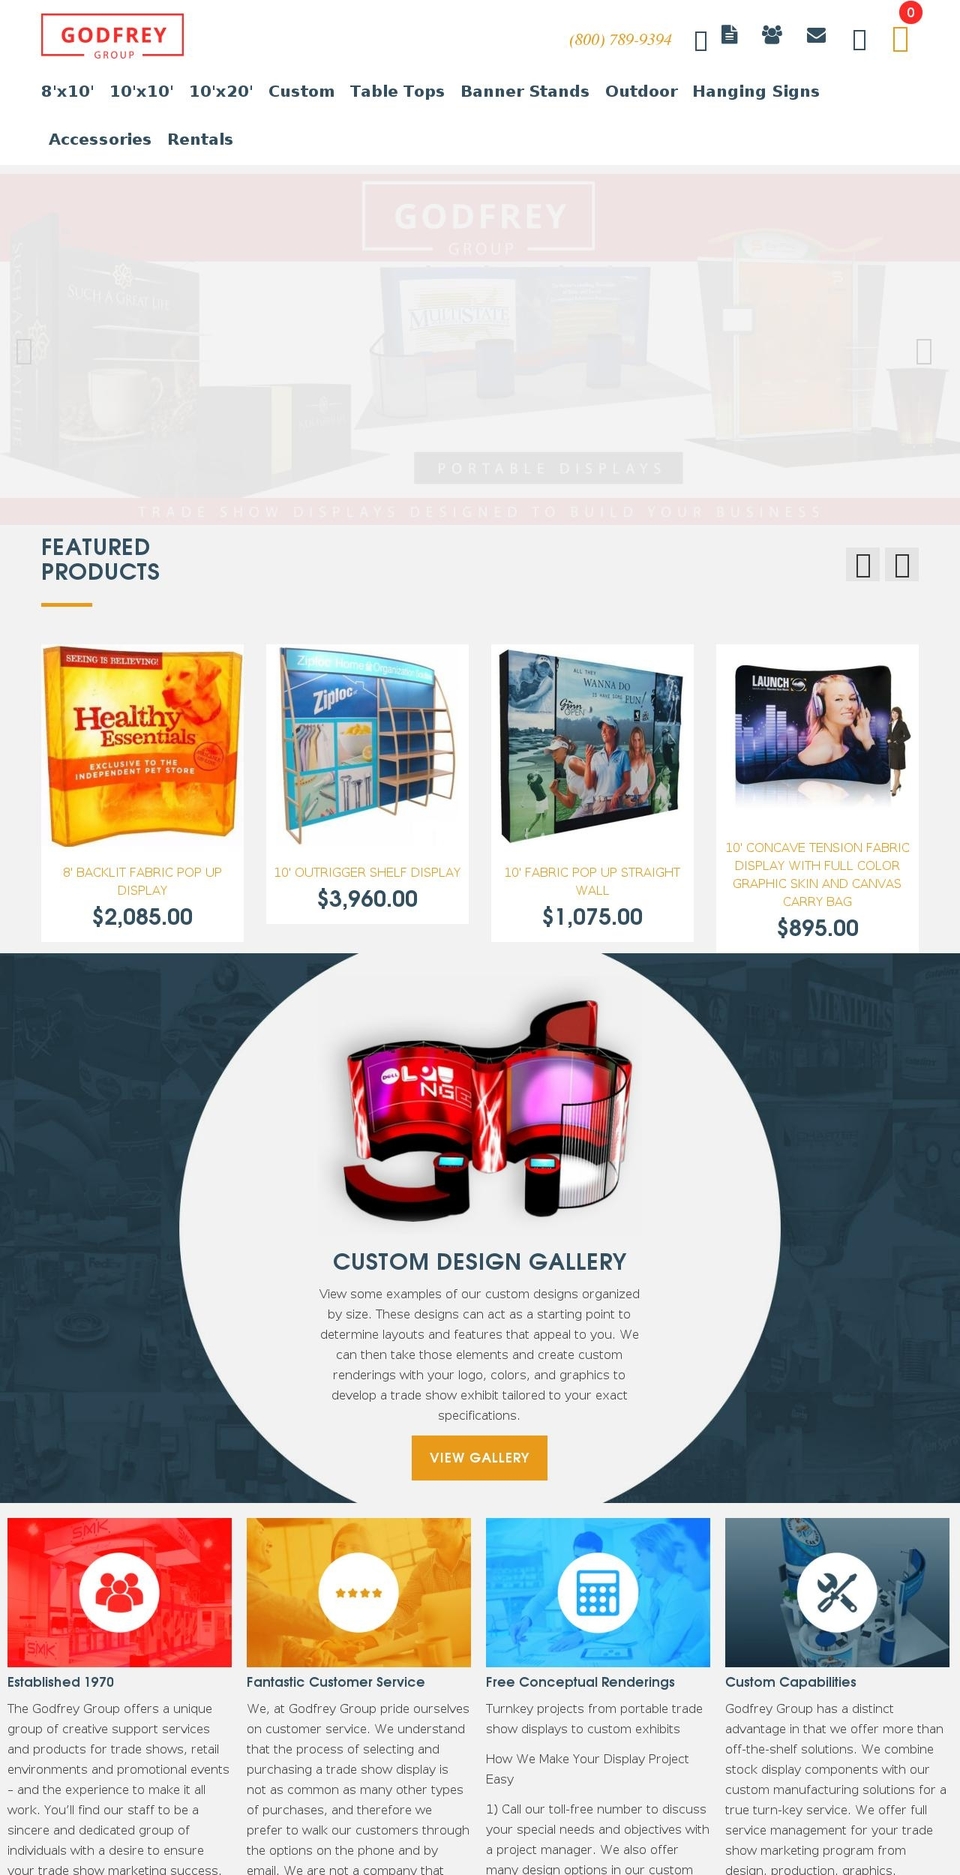 YourStore Shopify theme site example godfreygroup.com